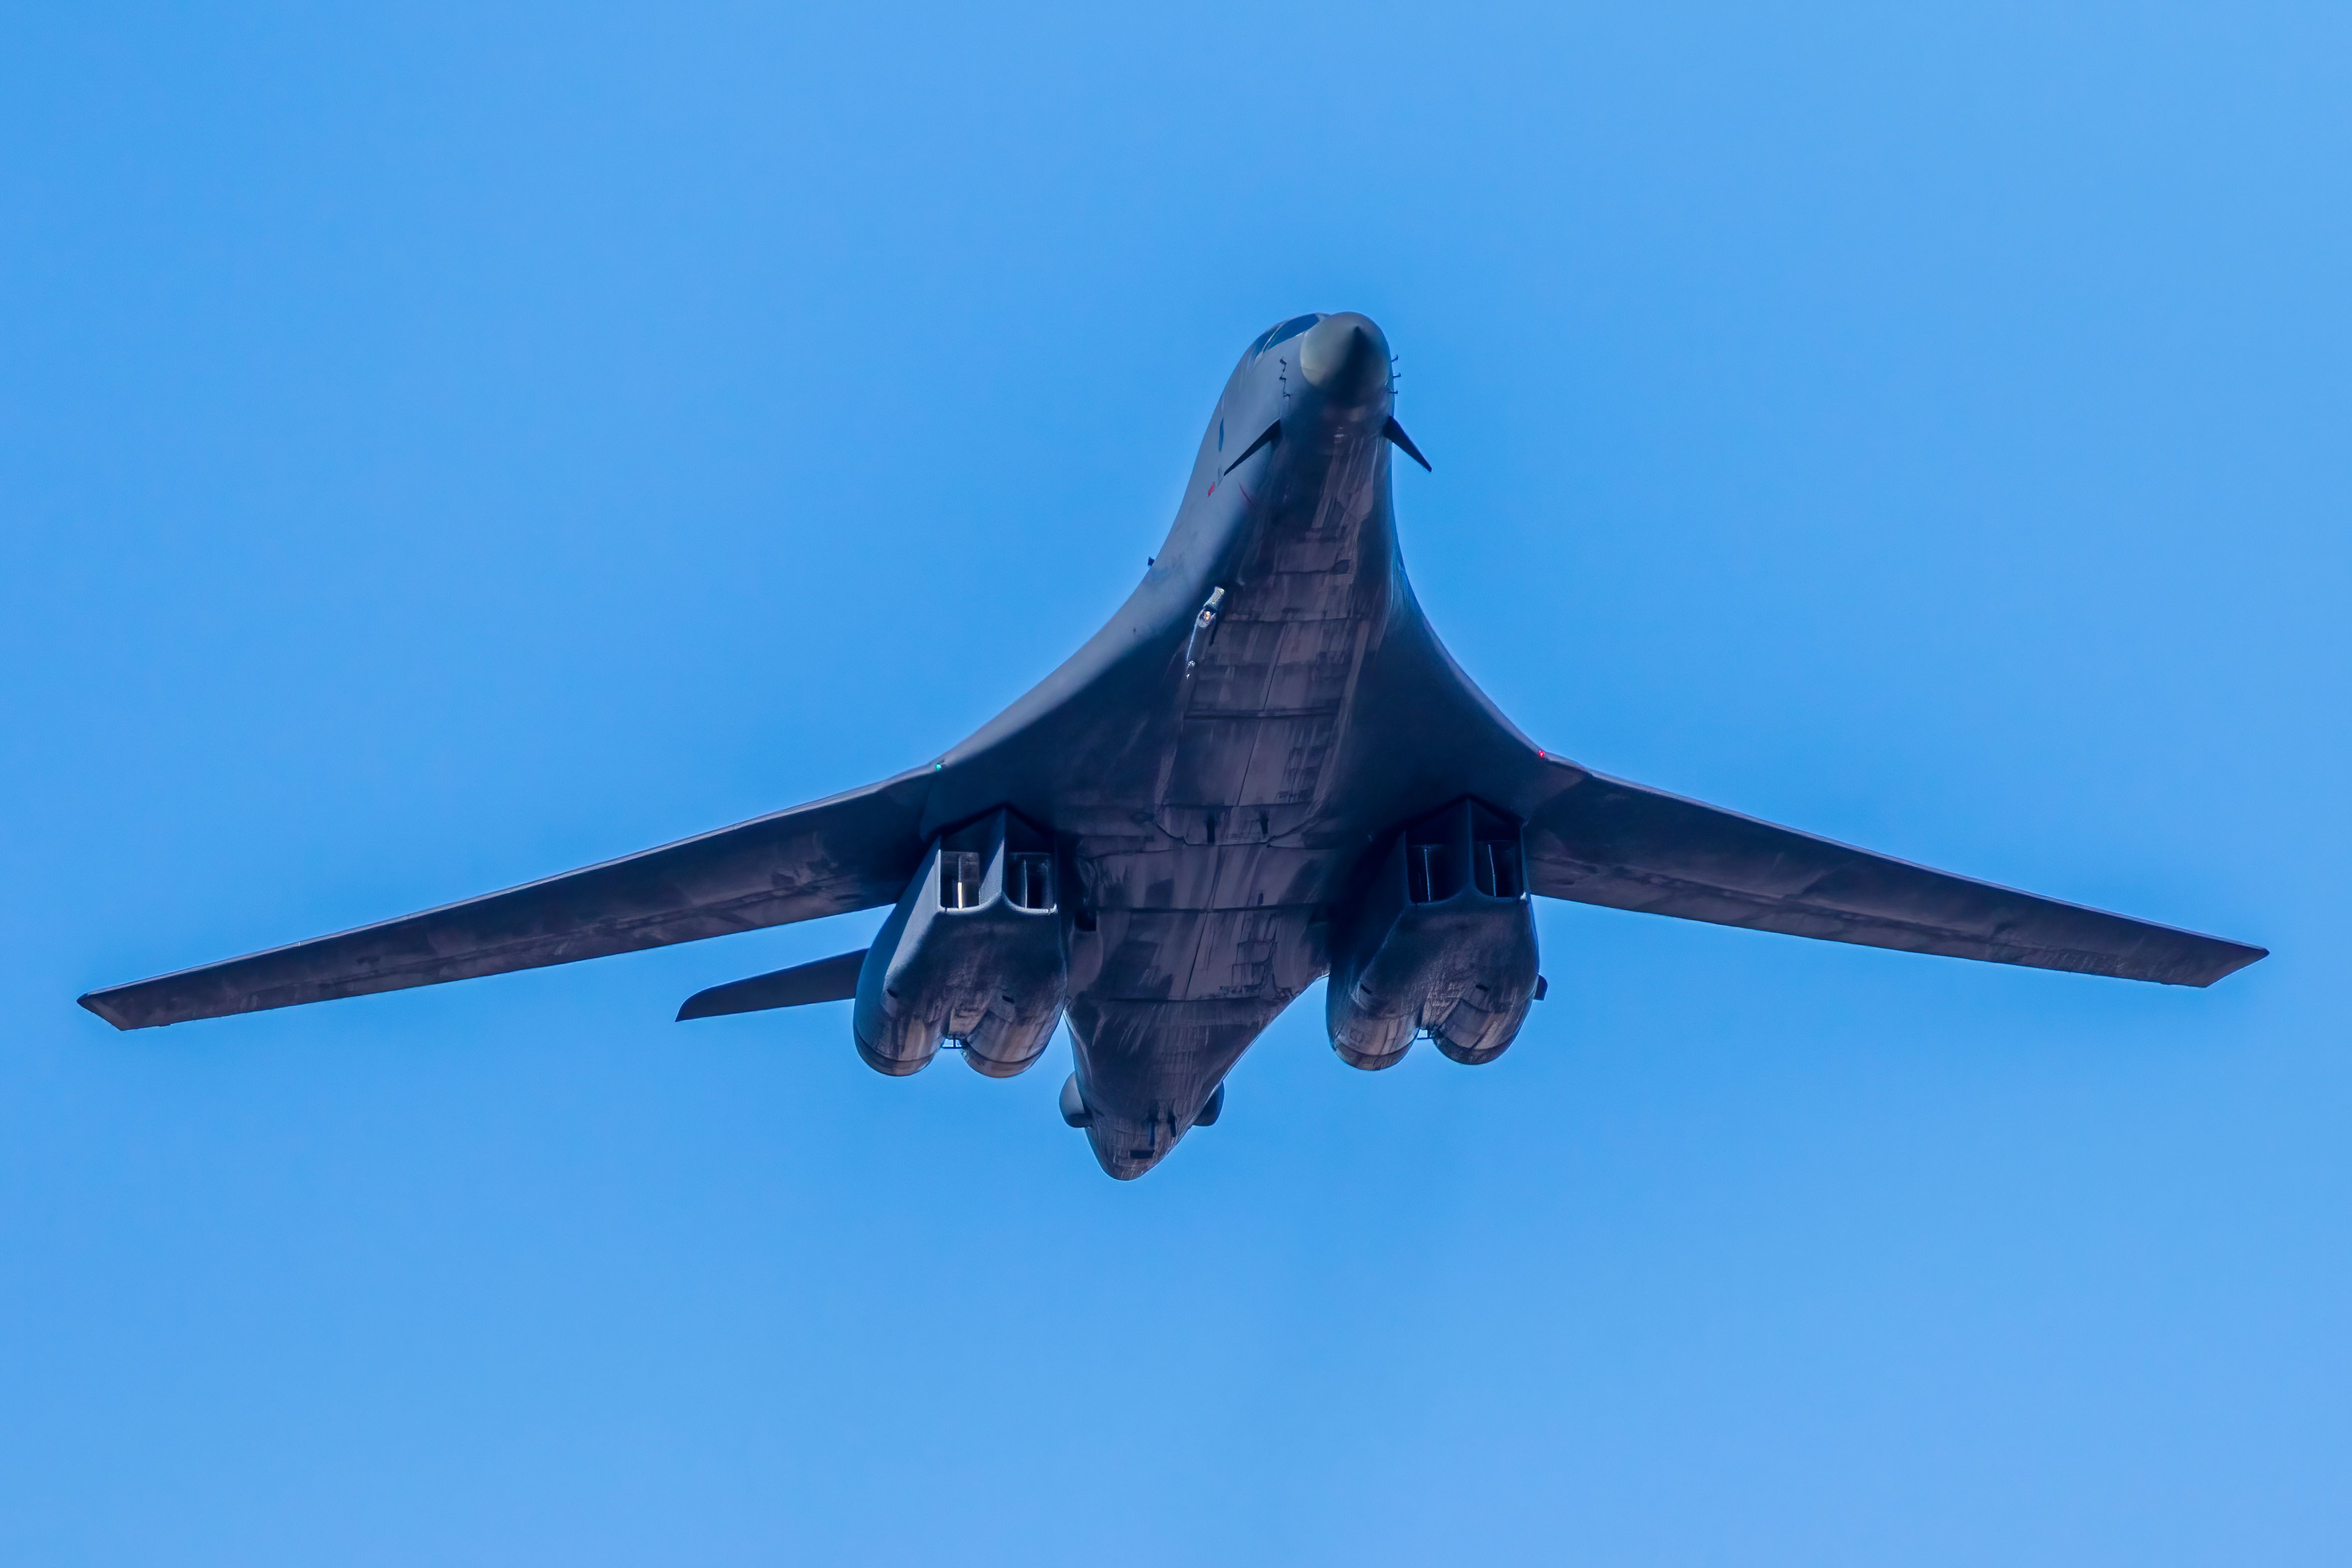 A B-1B lancer flying in the sky.